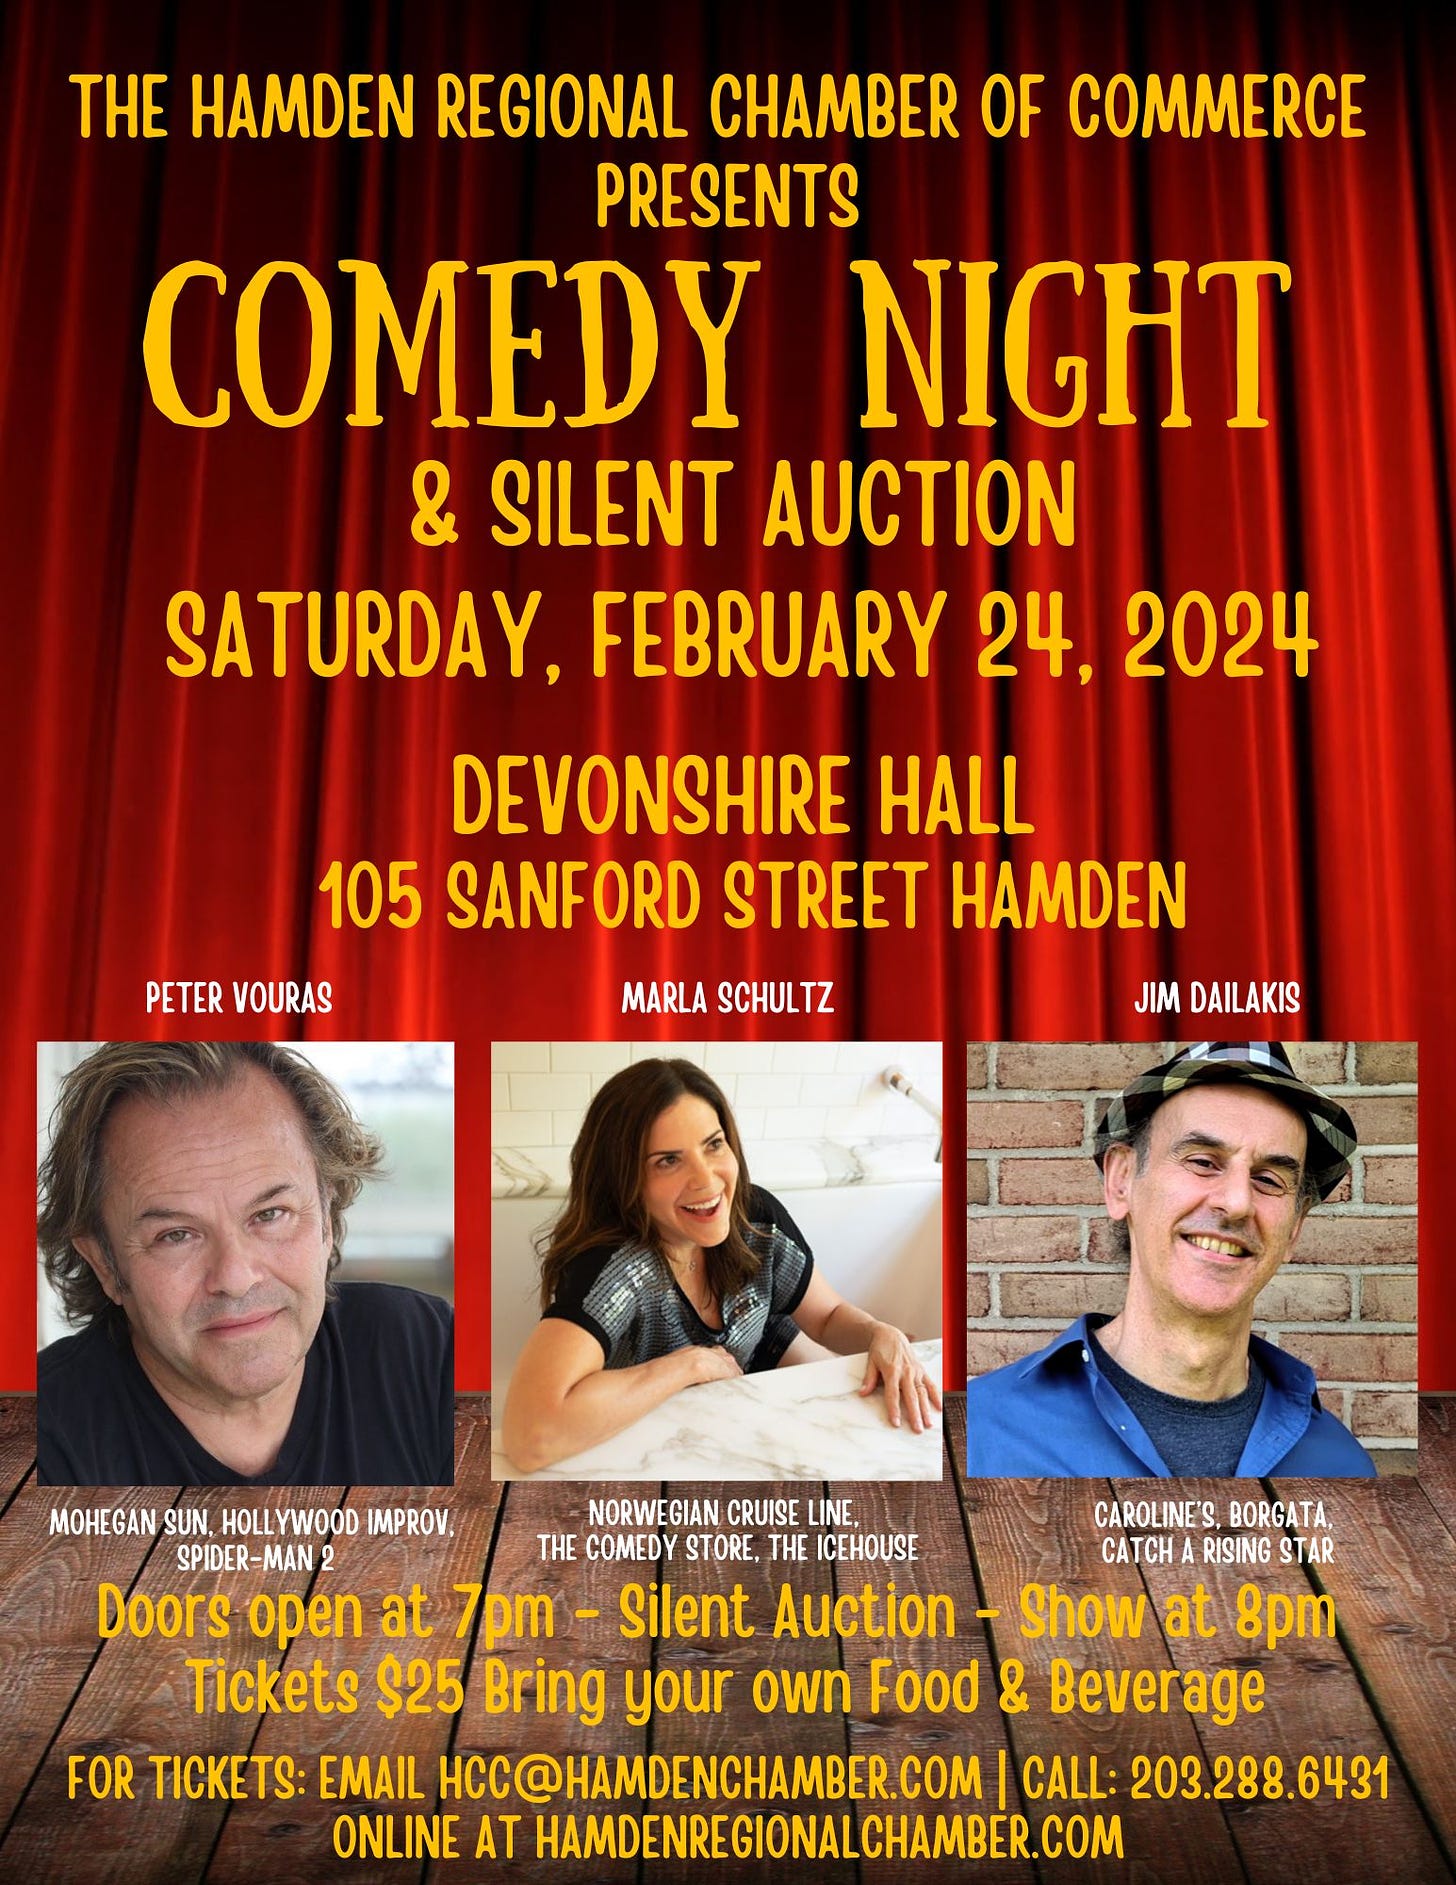 May be an image of 3 people and text that says 'THE HAMDEN REGIONAL CHAMBER OF COMMERCE PRESENTS COMEDY NIGHT & SILENT AUCTION SATURDAY, FEBRUARY 24, 2024 DEVONSHIRE HALL 105 SANFORD STREET HAMDEN PETER PETERVOURAS VOURAS MARLA SCHULTZ JIM DAILAKIS MOHEGAN SUN. HOLLYWOOD IMPROV, NORWEGIAN CRUISE LINE, CAROLINE'S, BORGATA, SPIDER-MA MAN 2 THE COMEDY STORE, THE ICEHOUSE CATCH RISING STAR Doors open at 7pm- Silent Auction Show at 8pm Tickets $25 Bring your own Food & Beverage FOR TICKETS: EMAIL HCC@HAMDENCHAMBER.COM CALL: 203.288.6431 ONLINE AT HAMDENREGIONALCHAMBER.COM'